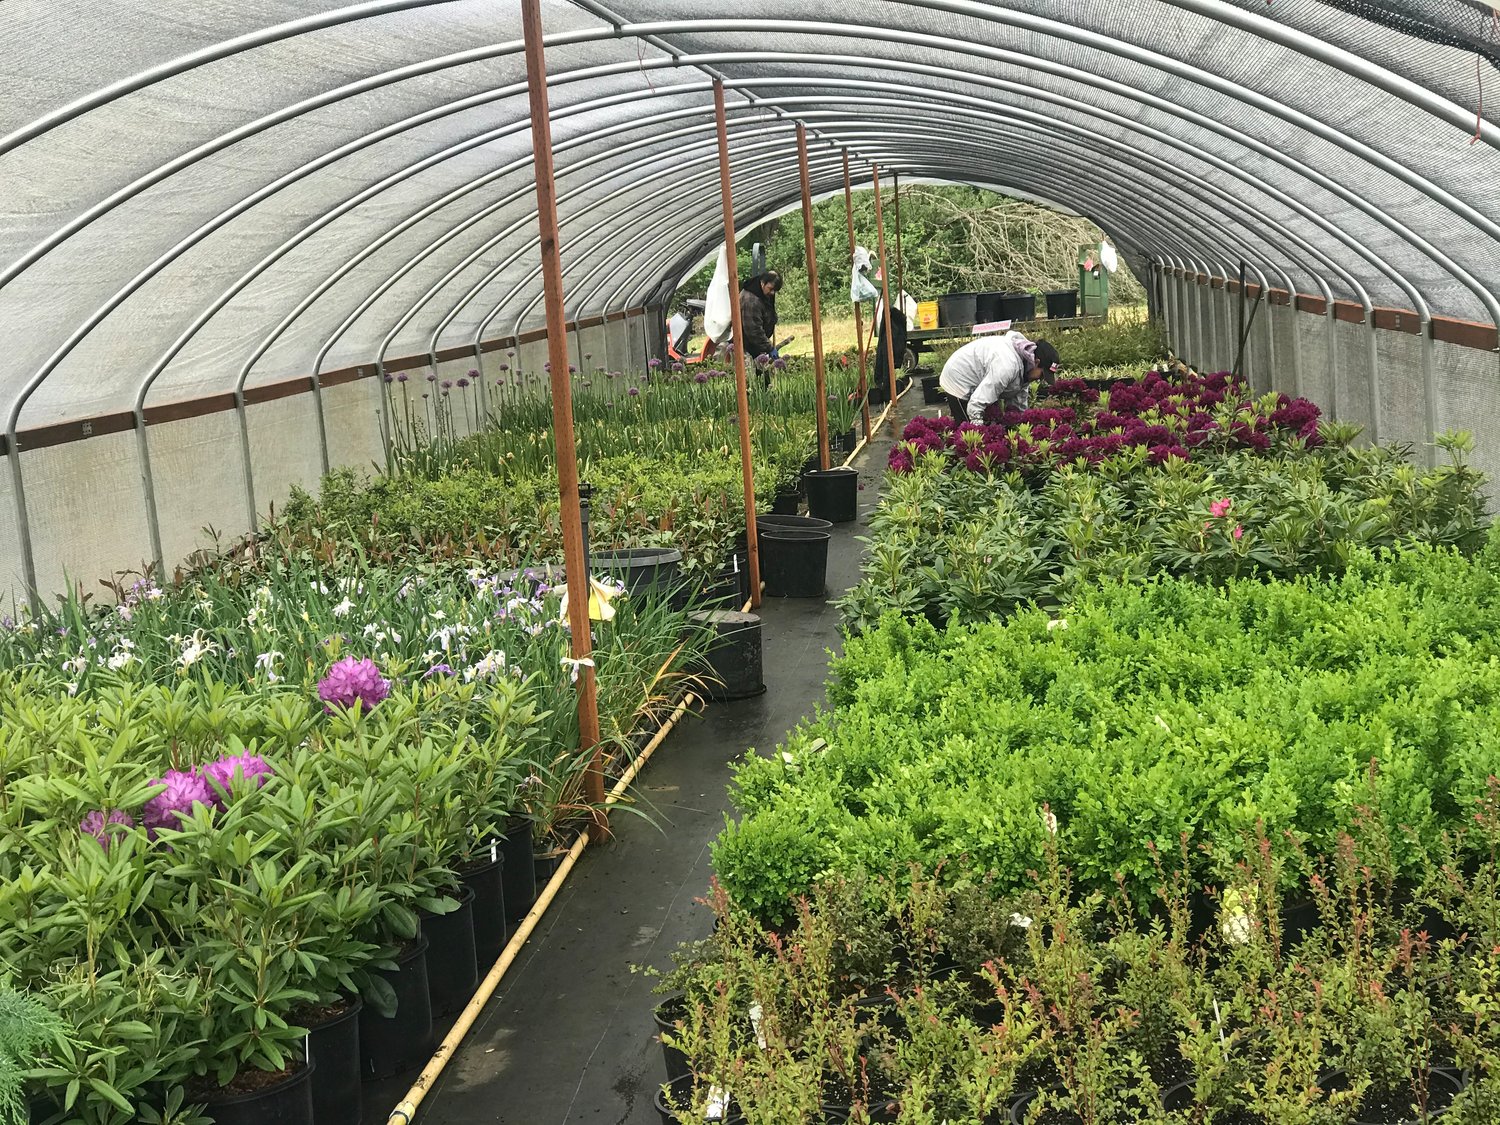 A production greenhouse of shrubs at All Season where workers maintain them.